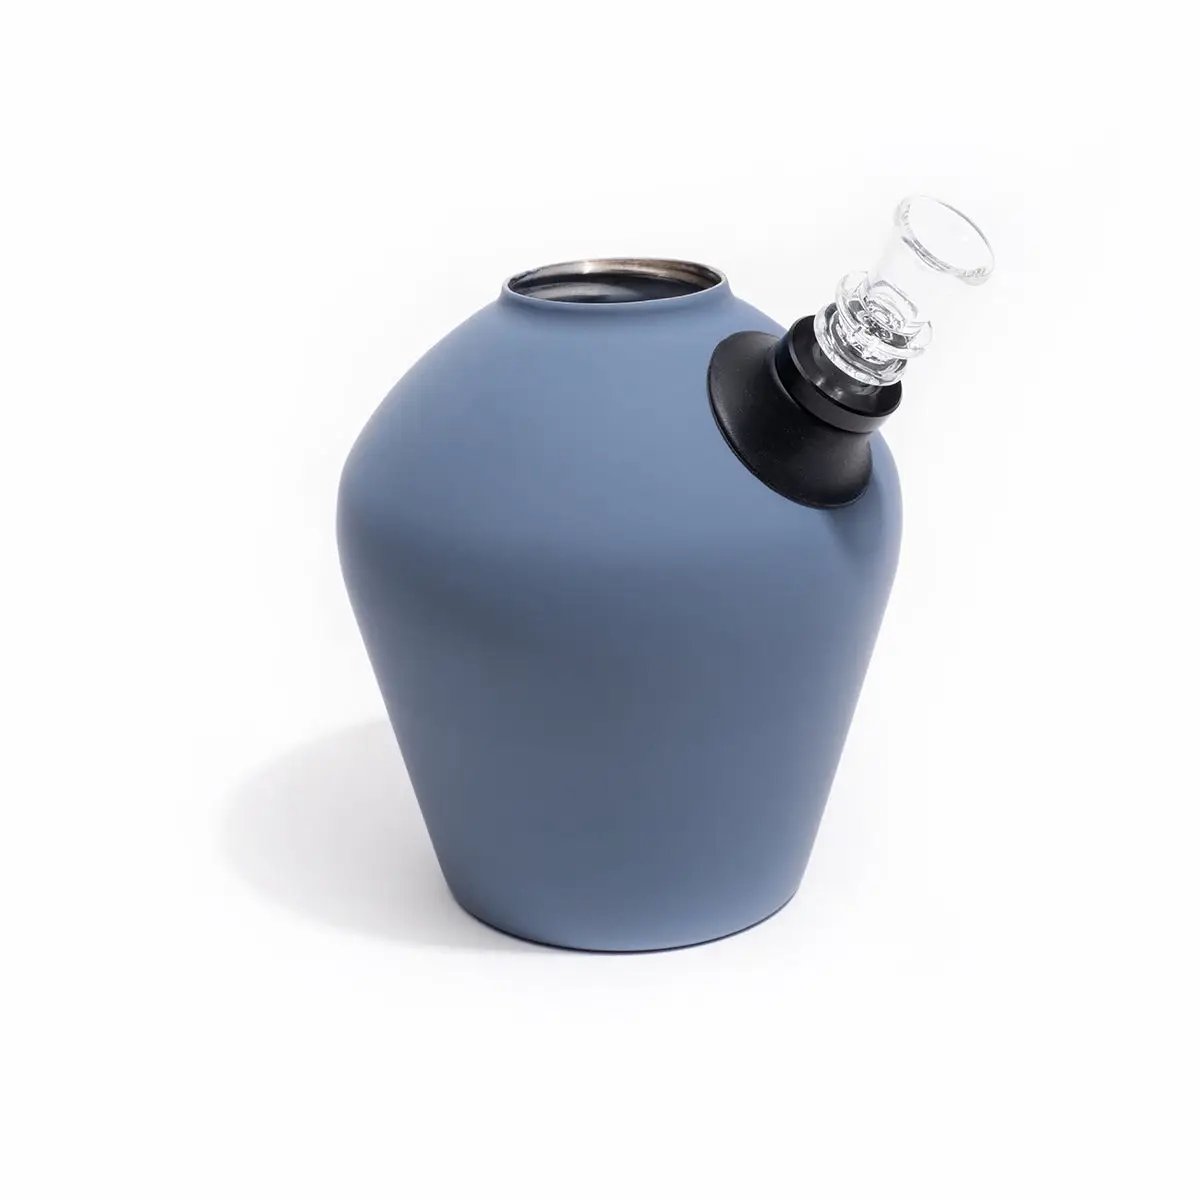 Chill - Limited Edition - Steel Blue Rubberized by Chill Steel Pipes